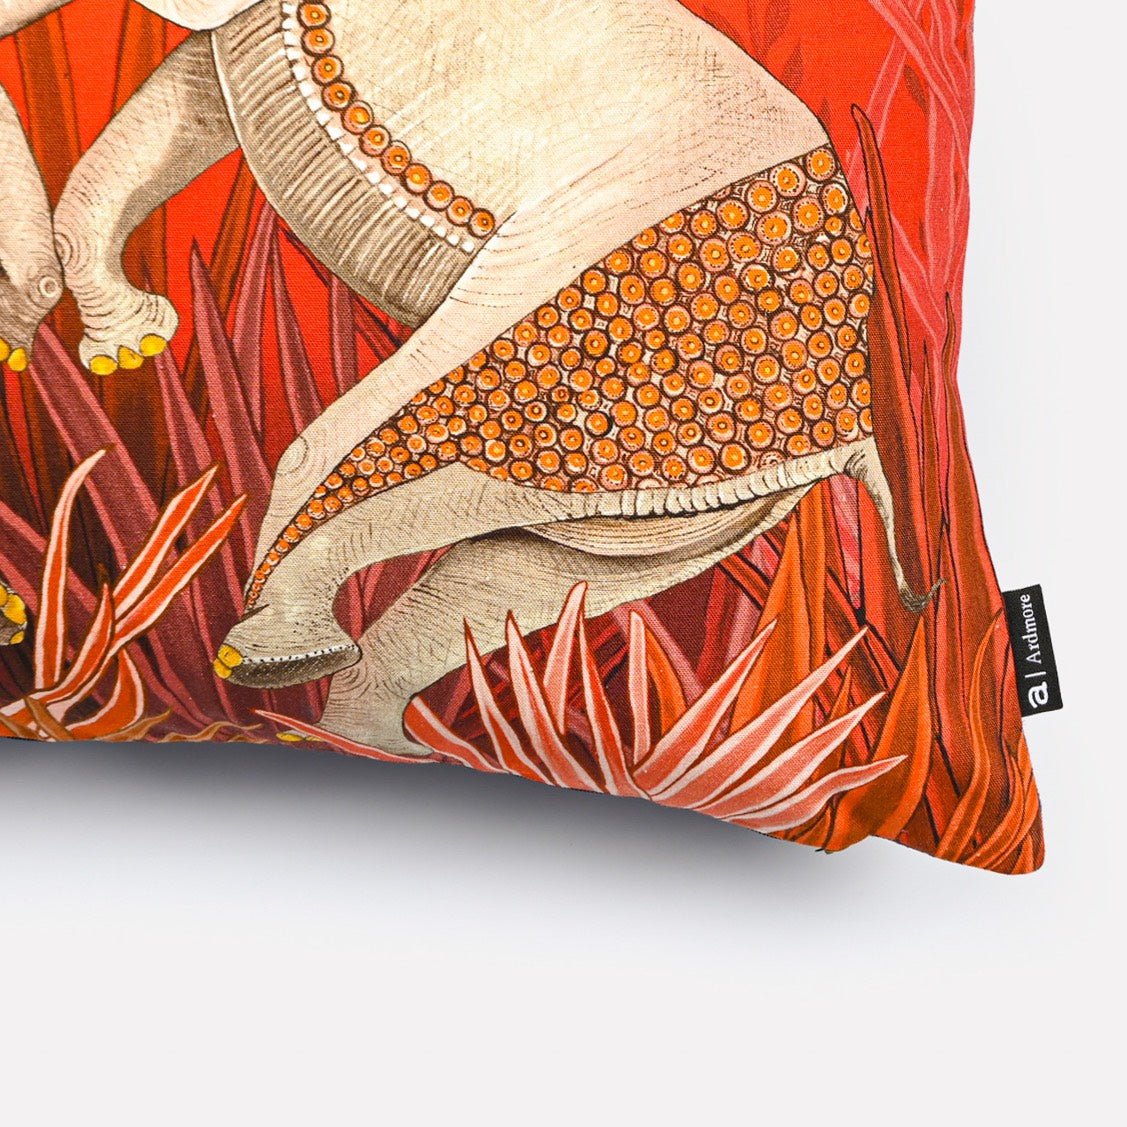 Dancing Elephant Sunset Cotton Cushion Cover